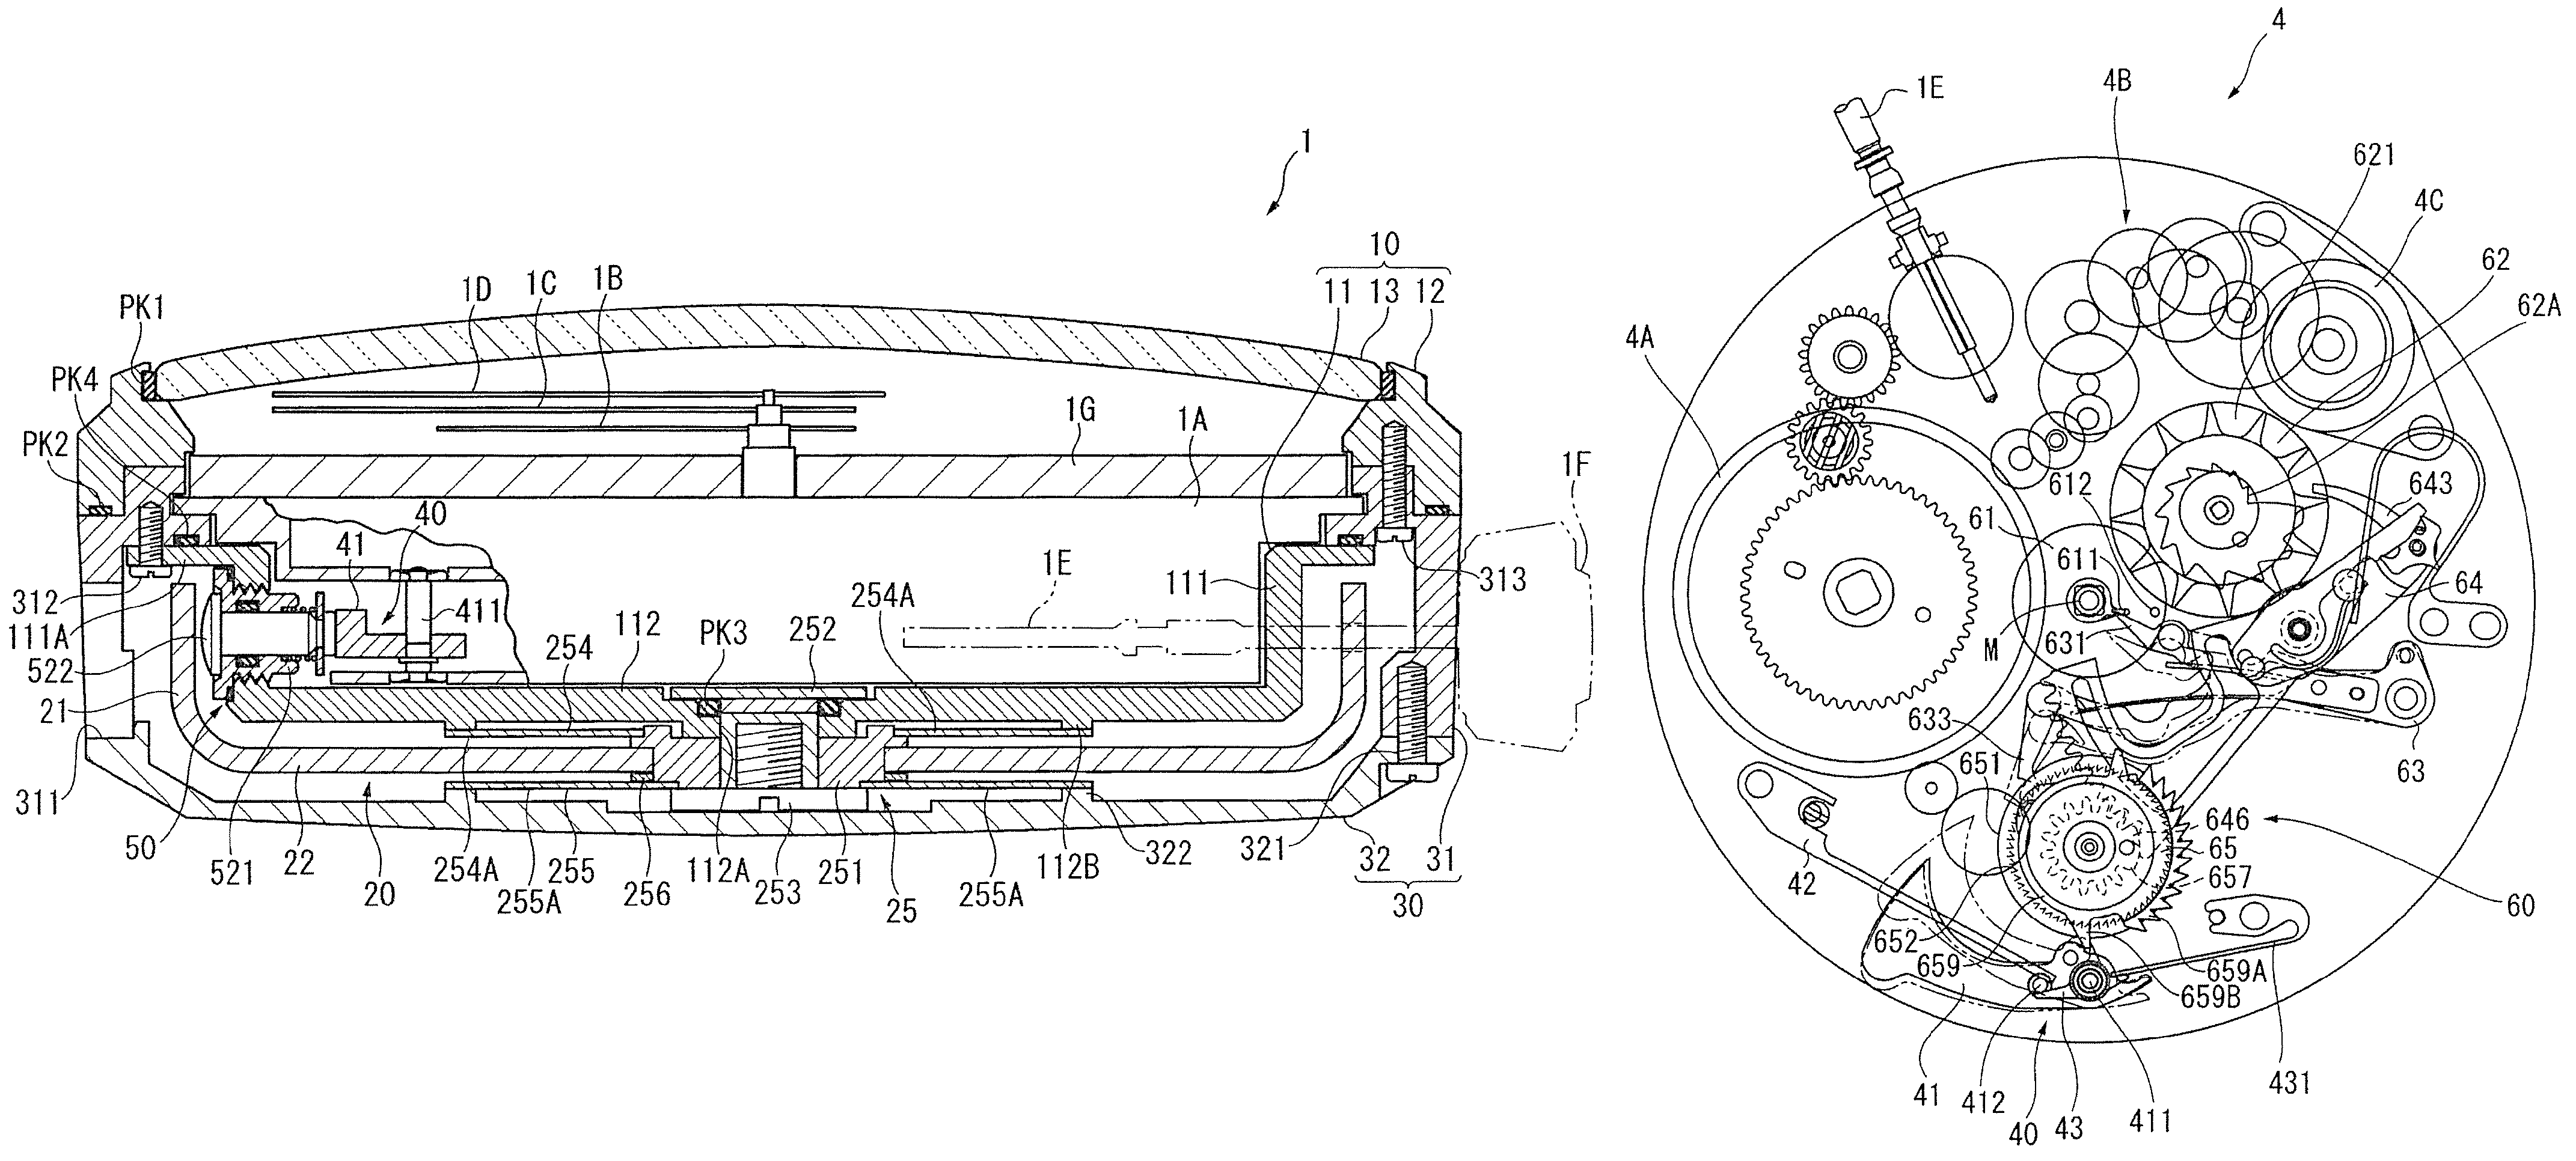 Timepiece and portable device